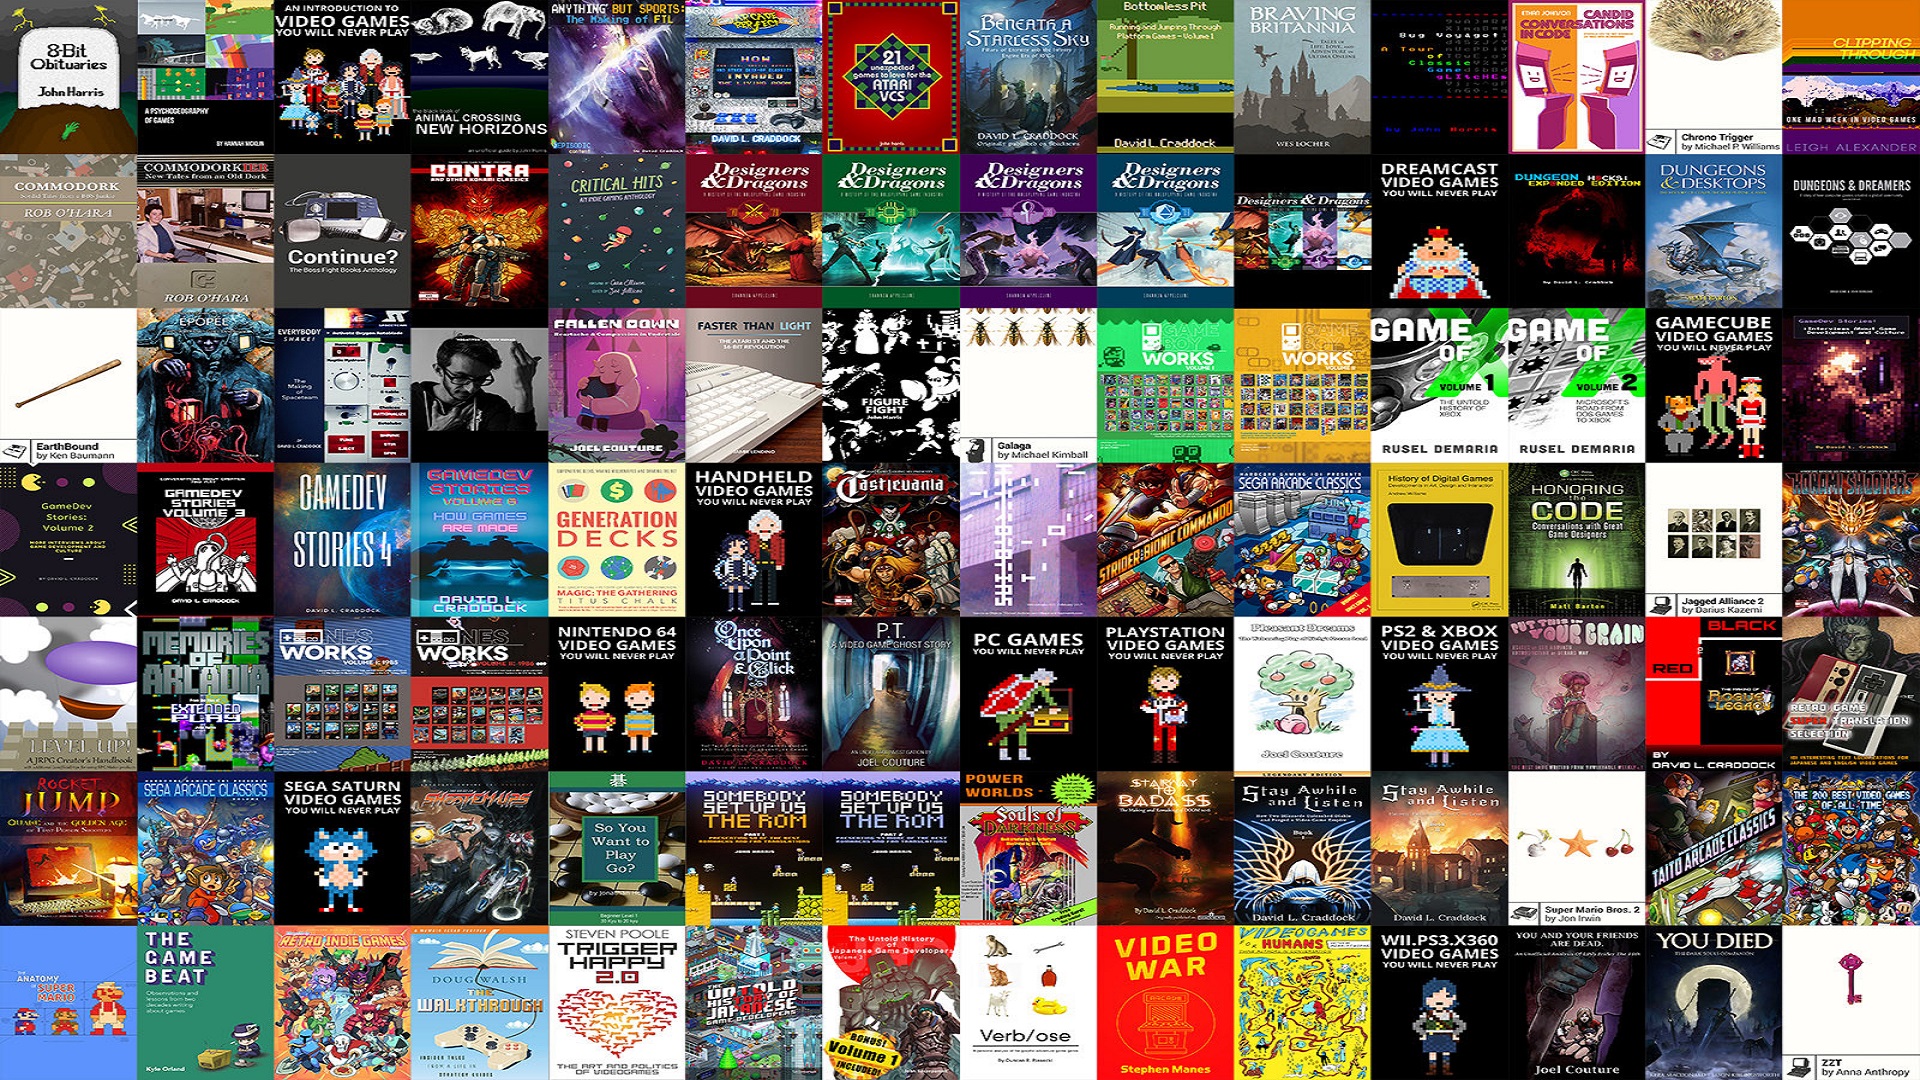 Storybundle Offering Nearly 100 Video Game Books For Only 30 Dread Xp